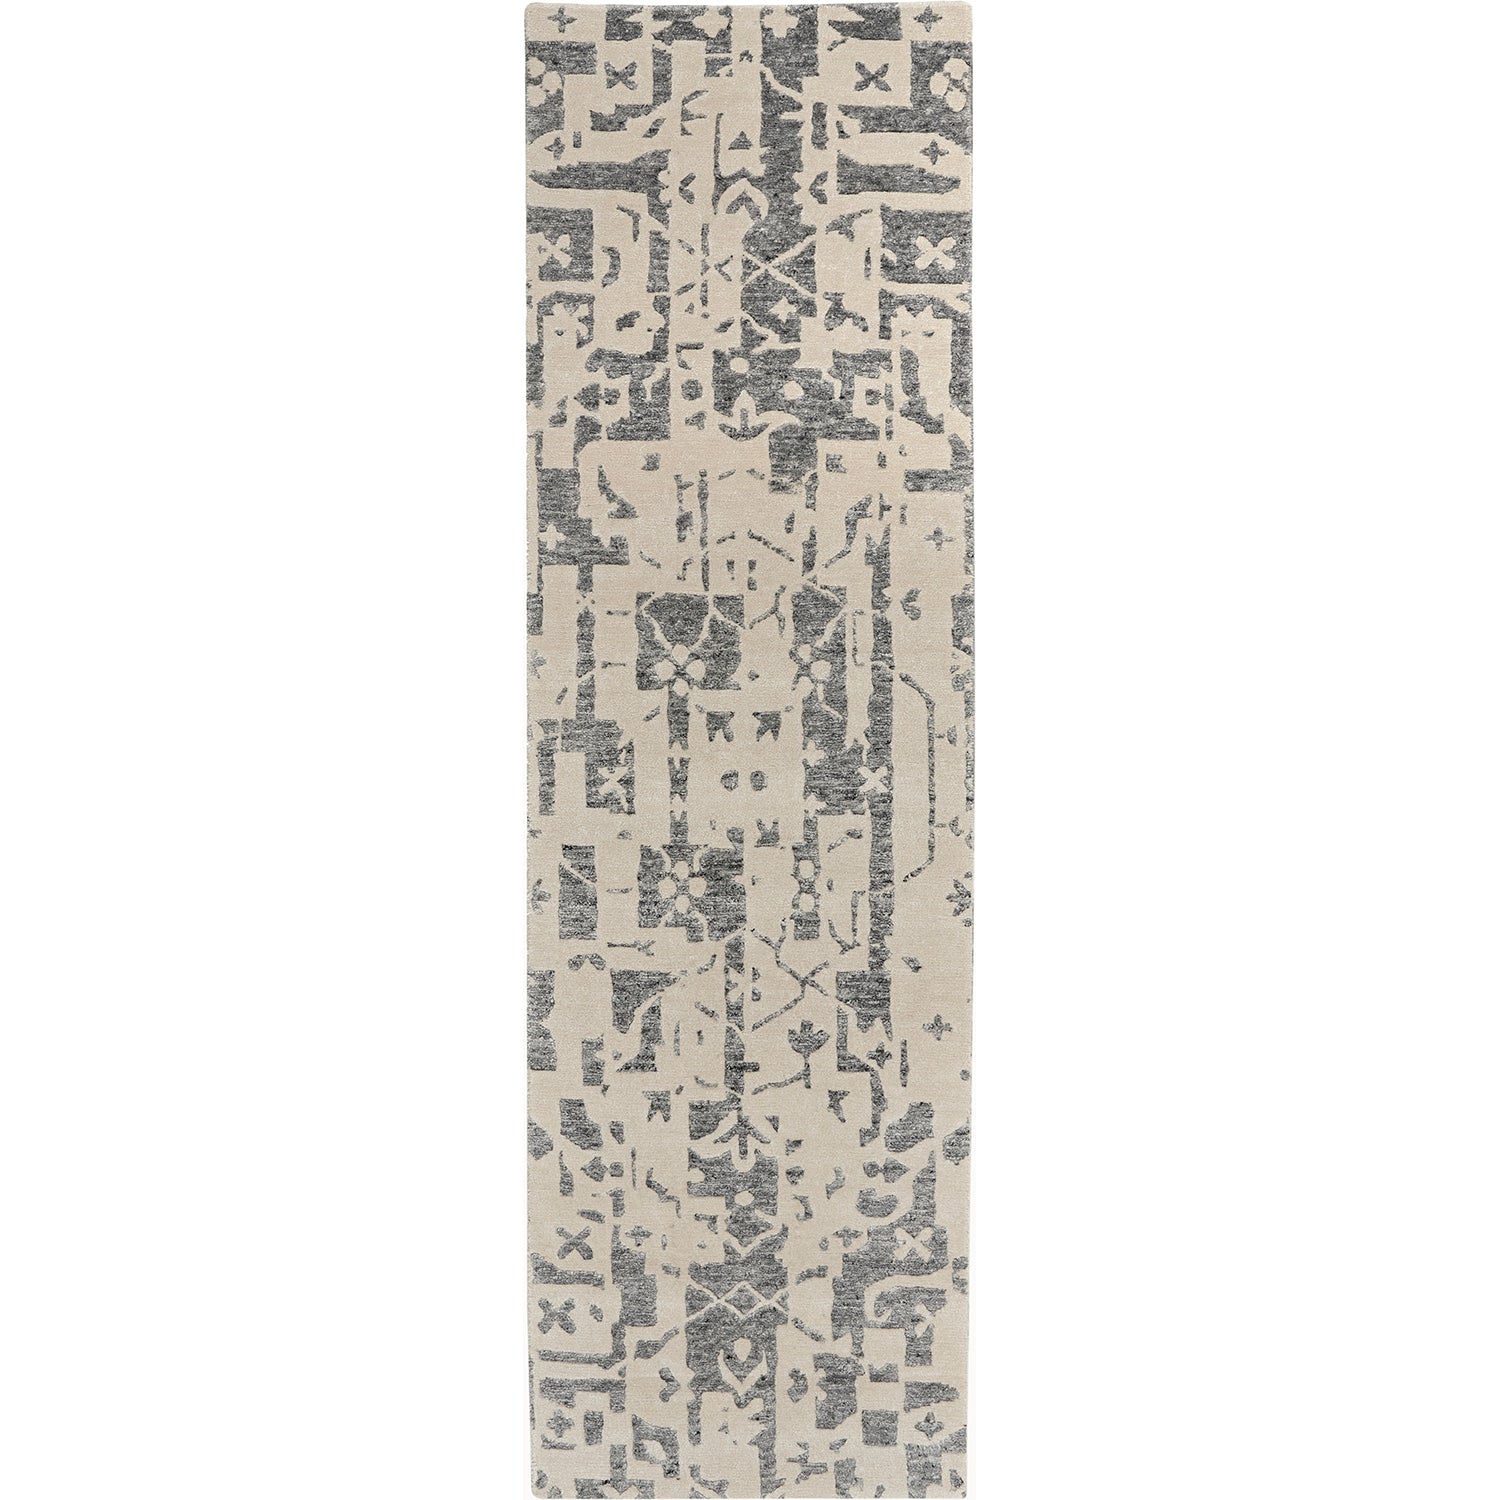 Intricate grey and off-white rug with vintage distressed pattern.